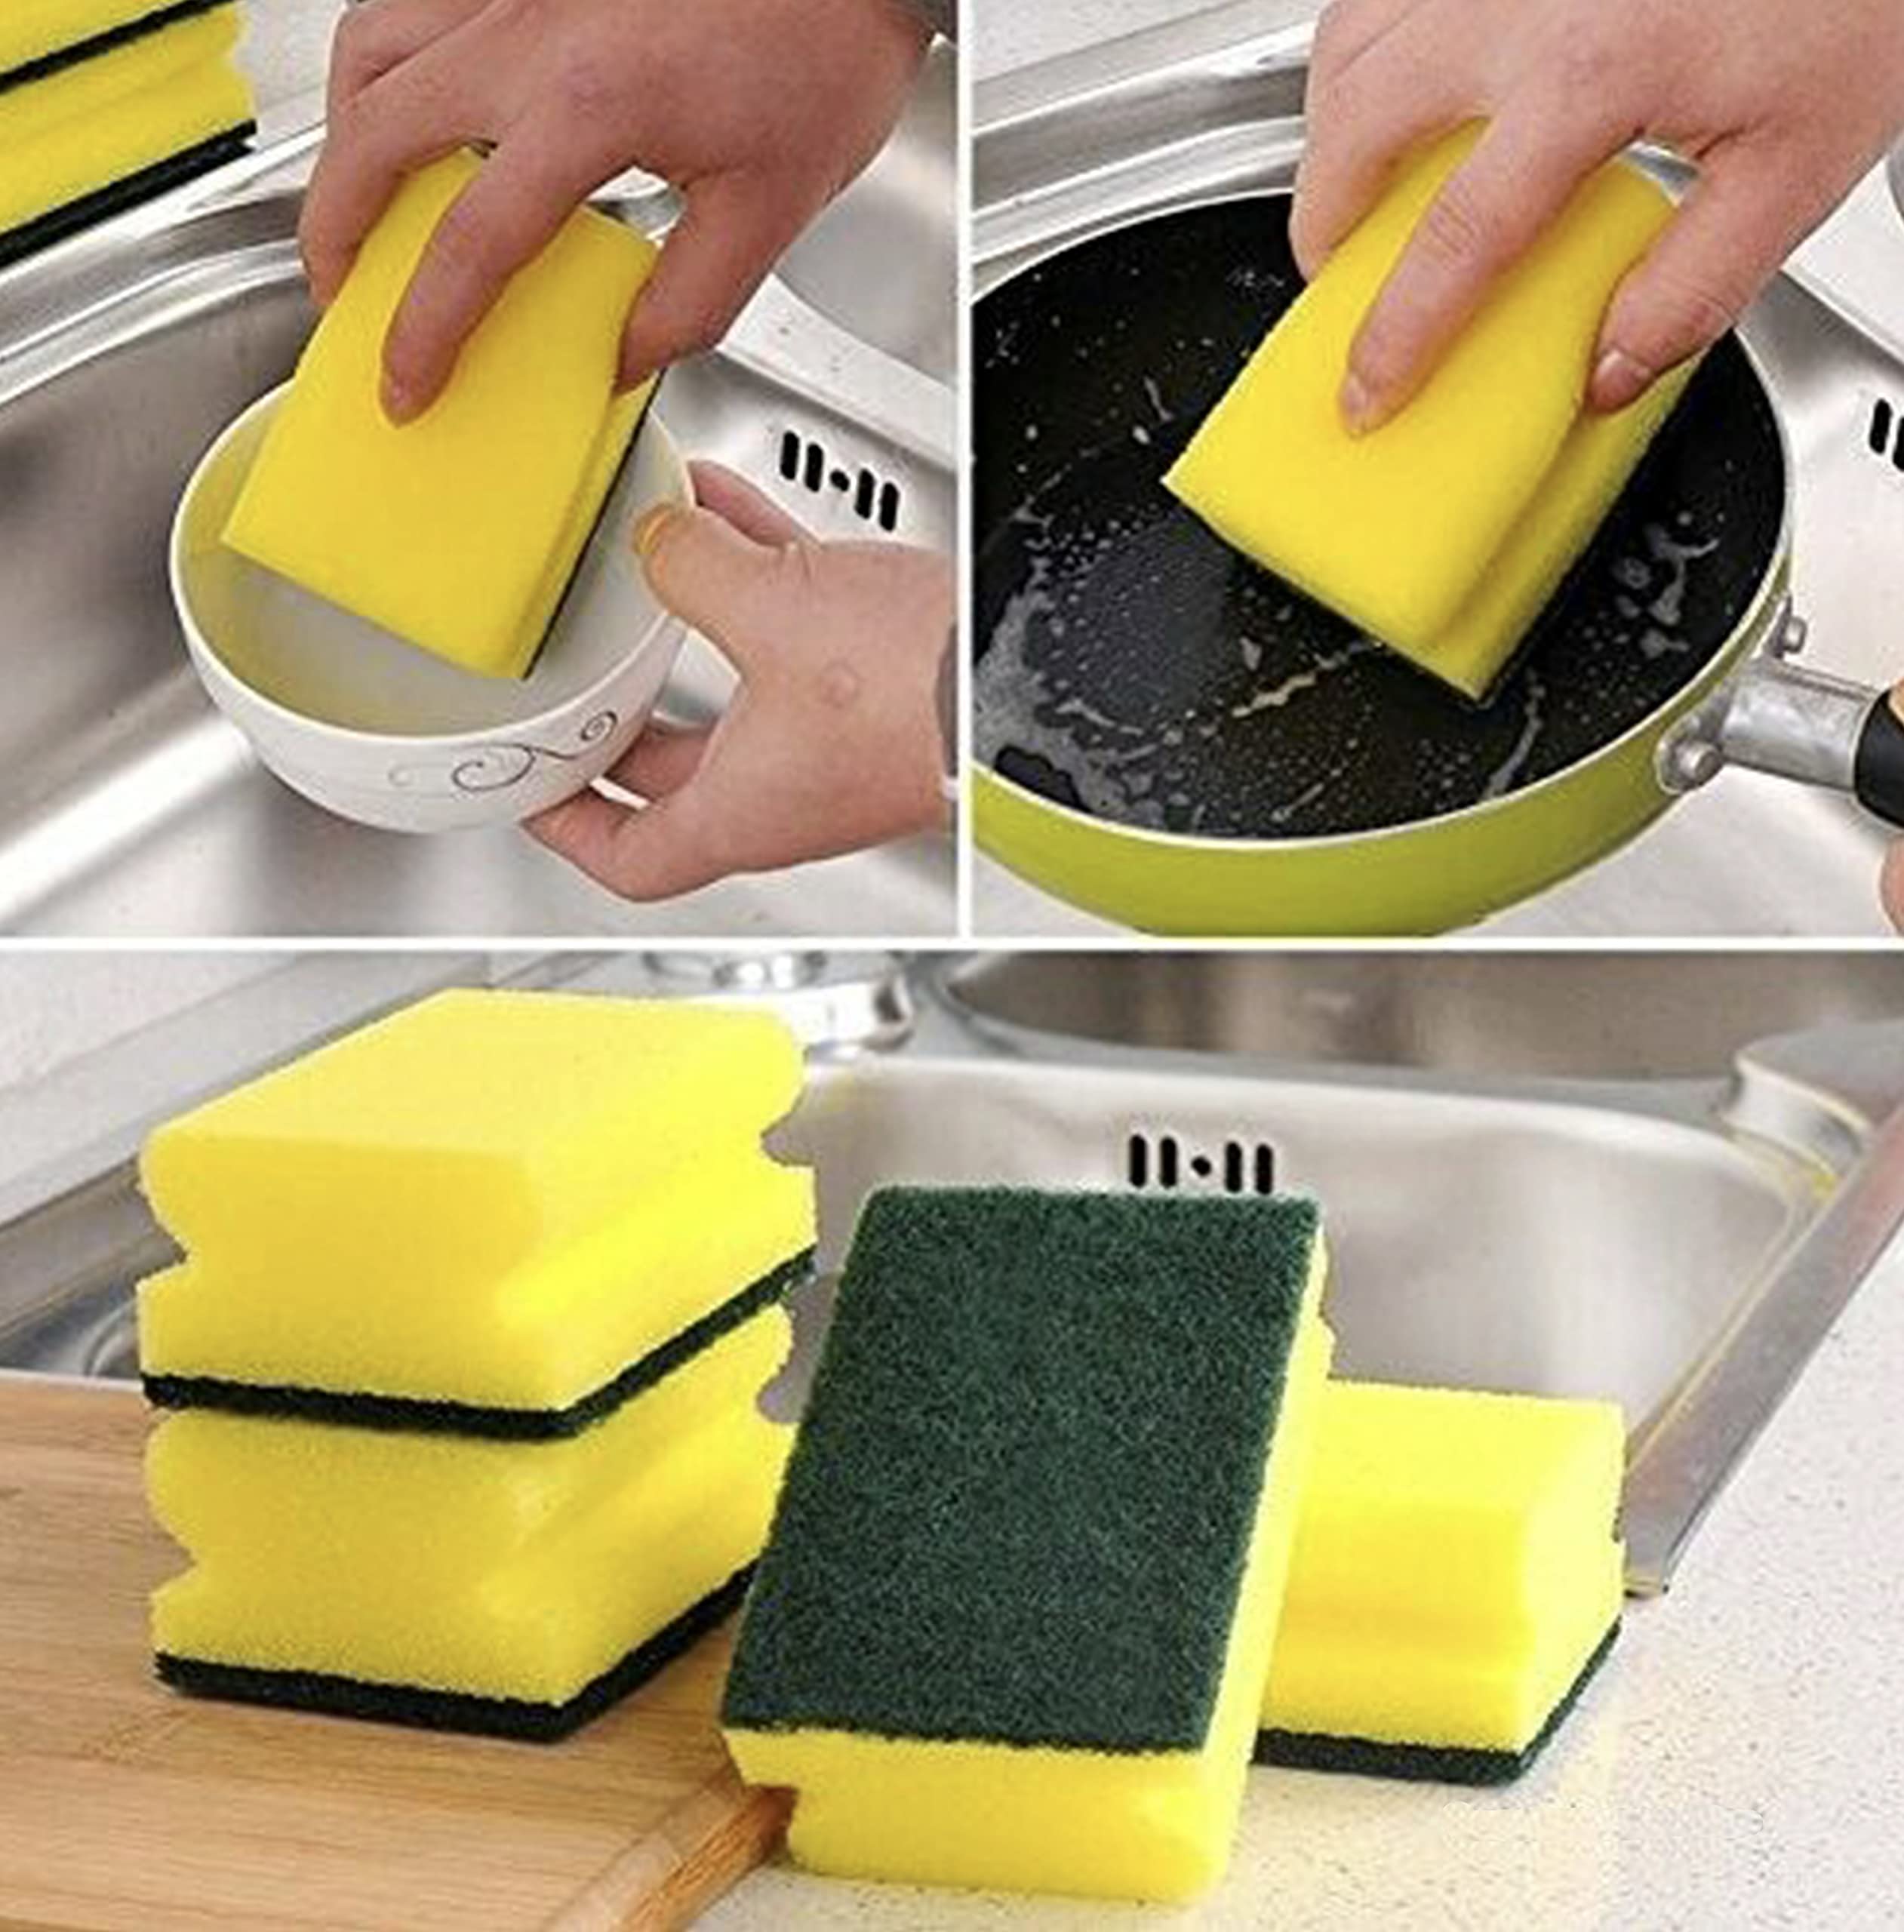 HOMESmith Heavy Duty Scrub Sponge, Dual-Sided Dish-washing & Cleaning Sponge for Kitchen, Bathroom and Home Cleaning (Pack of 8)